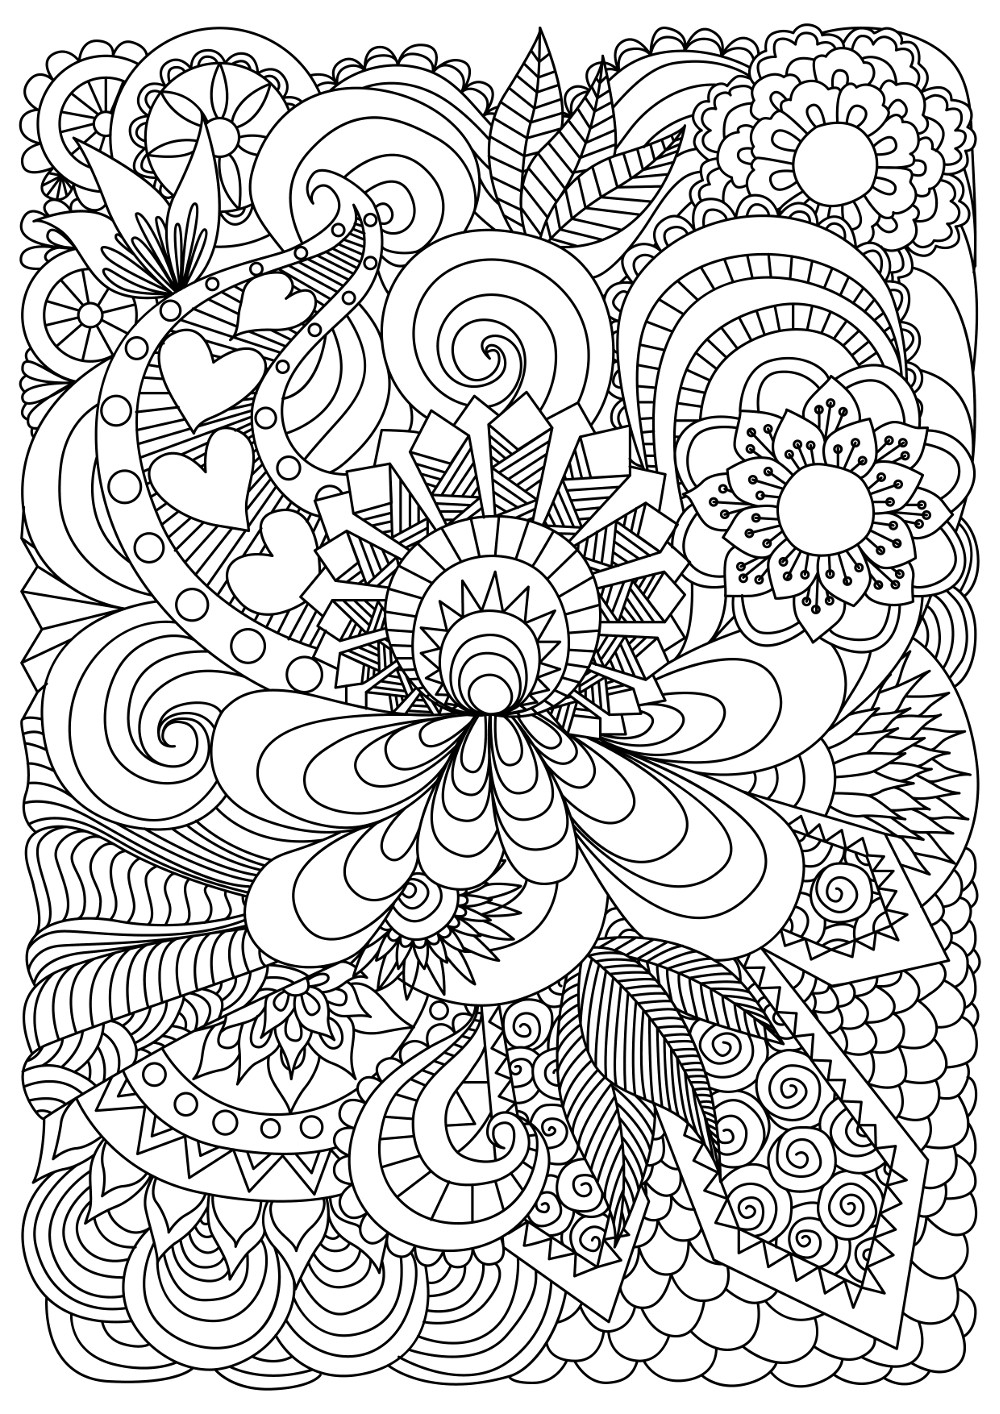 37 Best Adults Coloring Pages Updated 2018